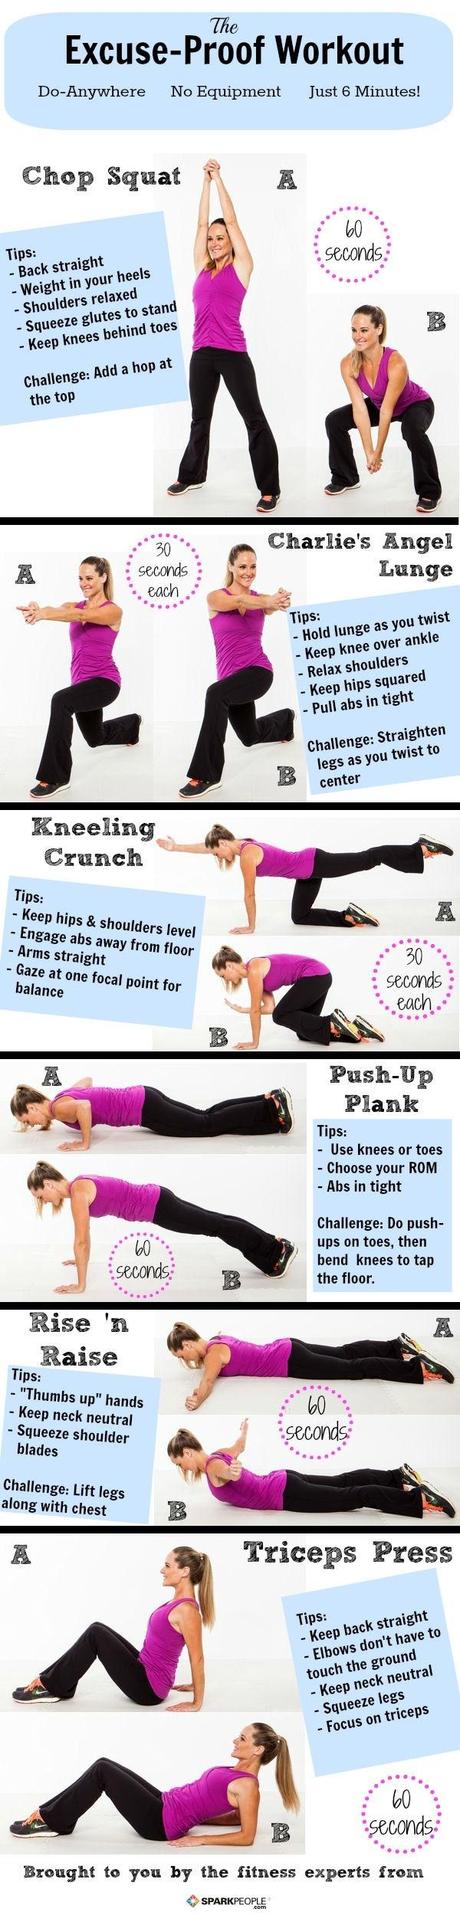 Some Fitness Favorites from Pinterest